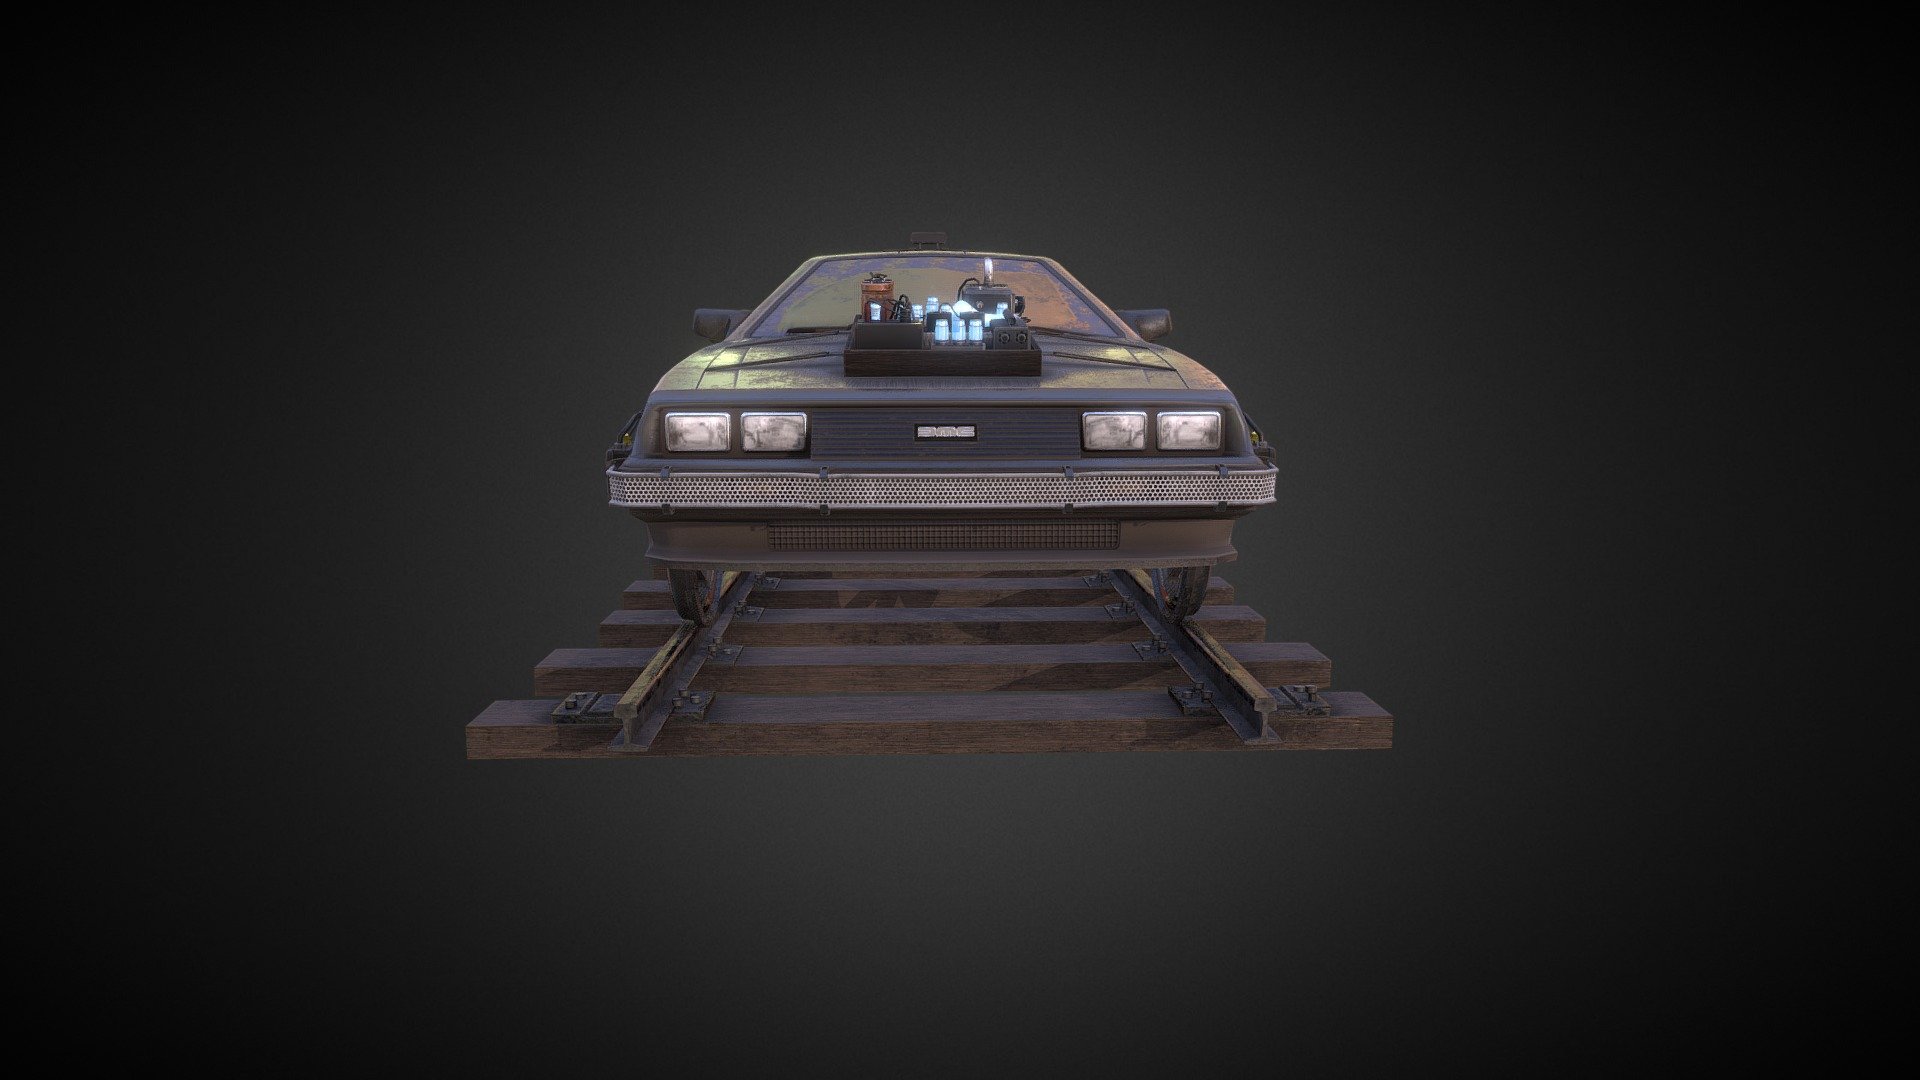 An attempt at imitating the DMC-12 from Back to the Future 3 with rail wheels. This is my first time texturizing with Substance Painter, so please comment on any possible improvements you see^^ - Delorean DMC-12 (BTTF-3) Railway Version - 3D model by edutorre 3d model